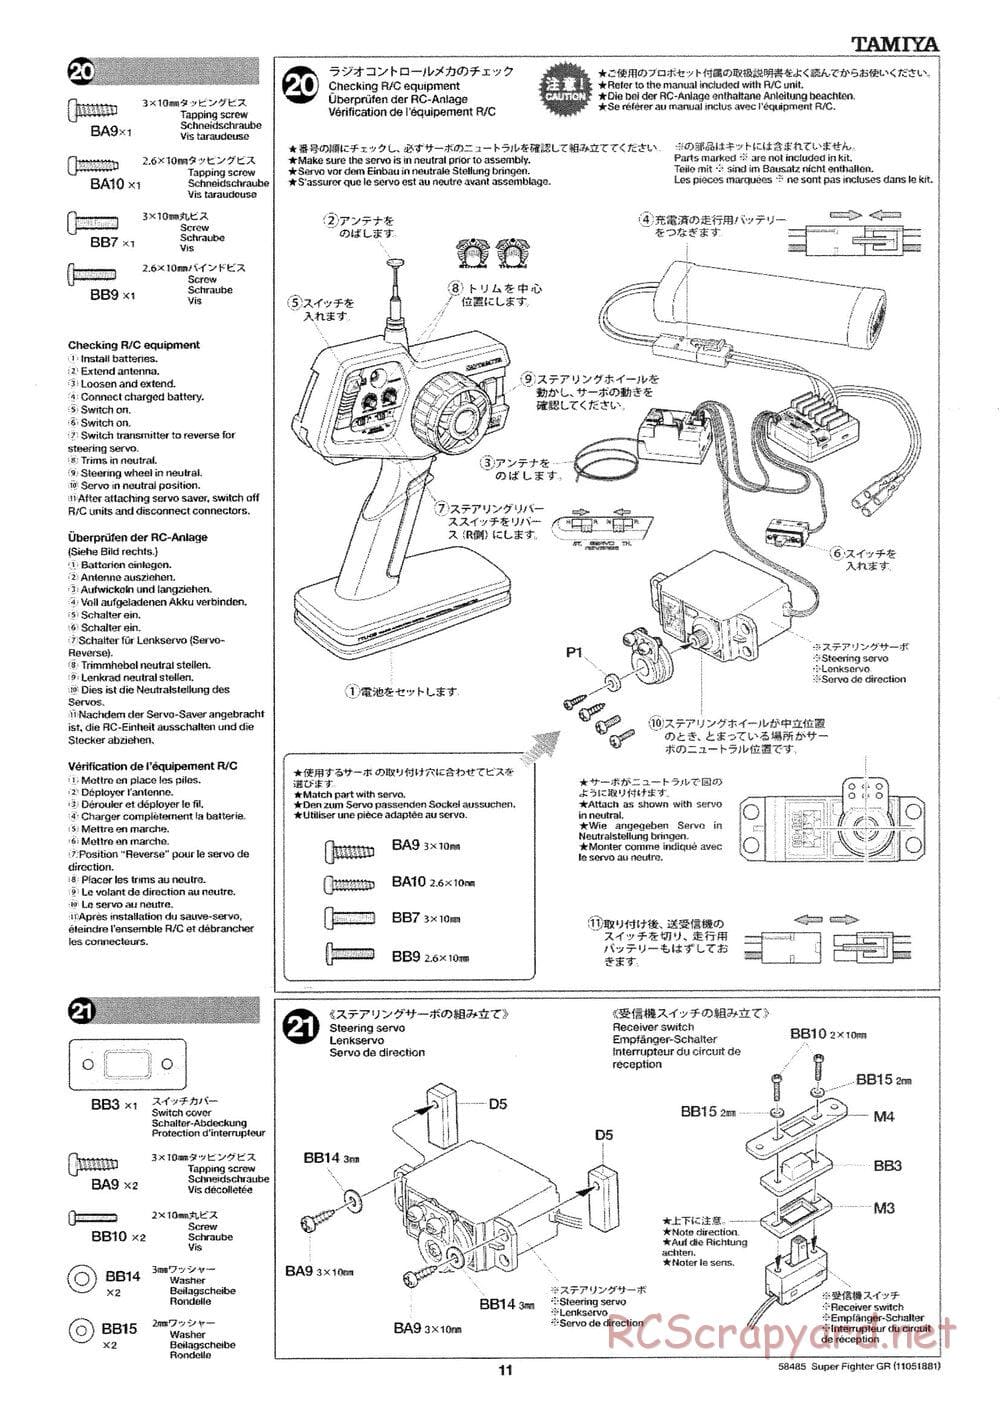 Tamiya - Super Fighter GR - DT-02 Chassis - Manual - Page 11